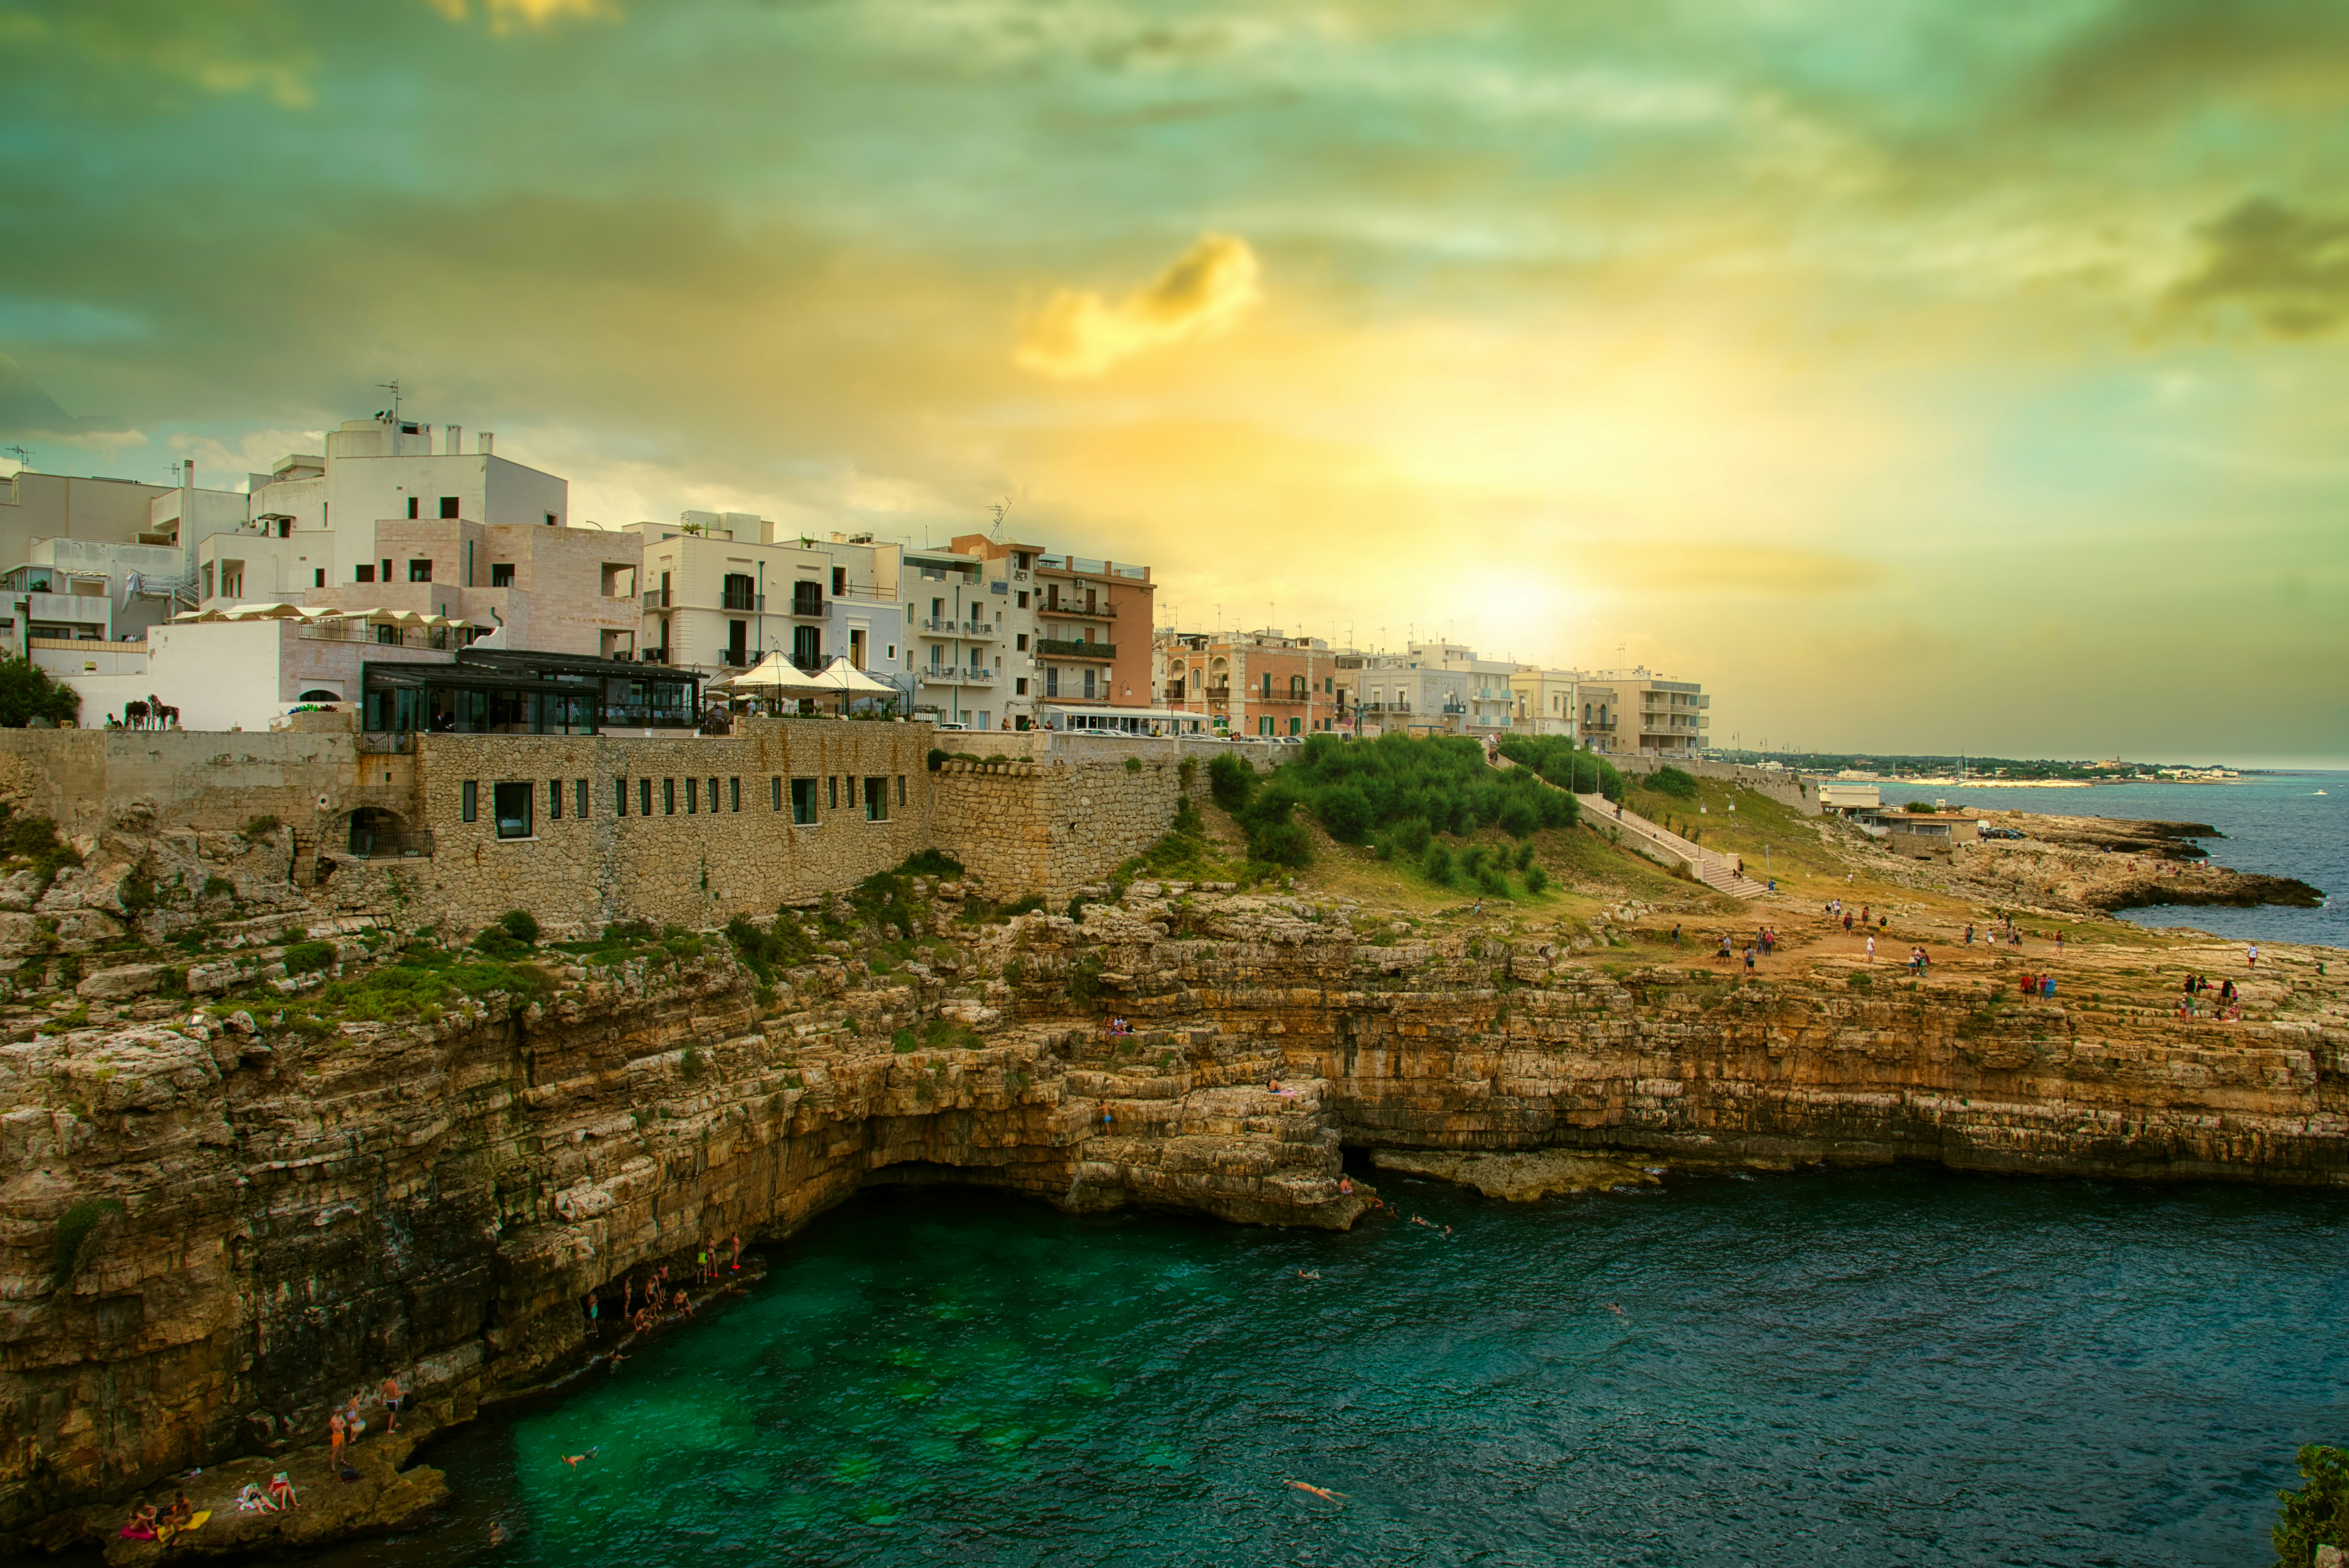 Polignano a Mare it's a wonderful place where spend holidays in the south of Italy.